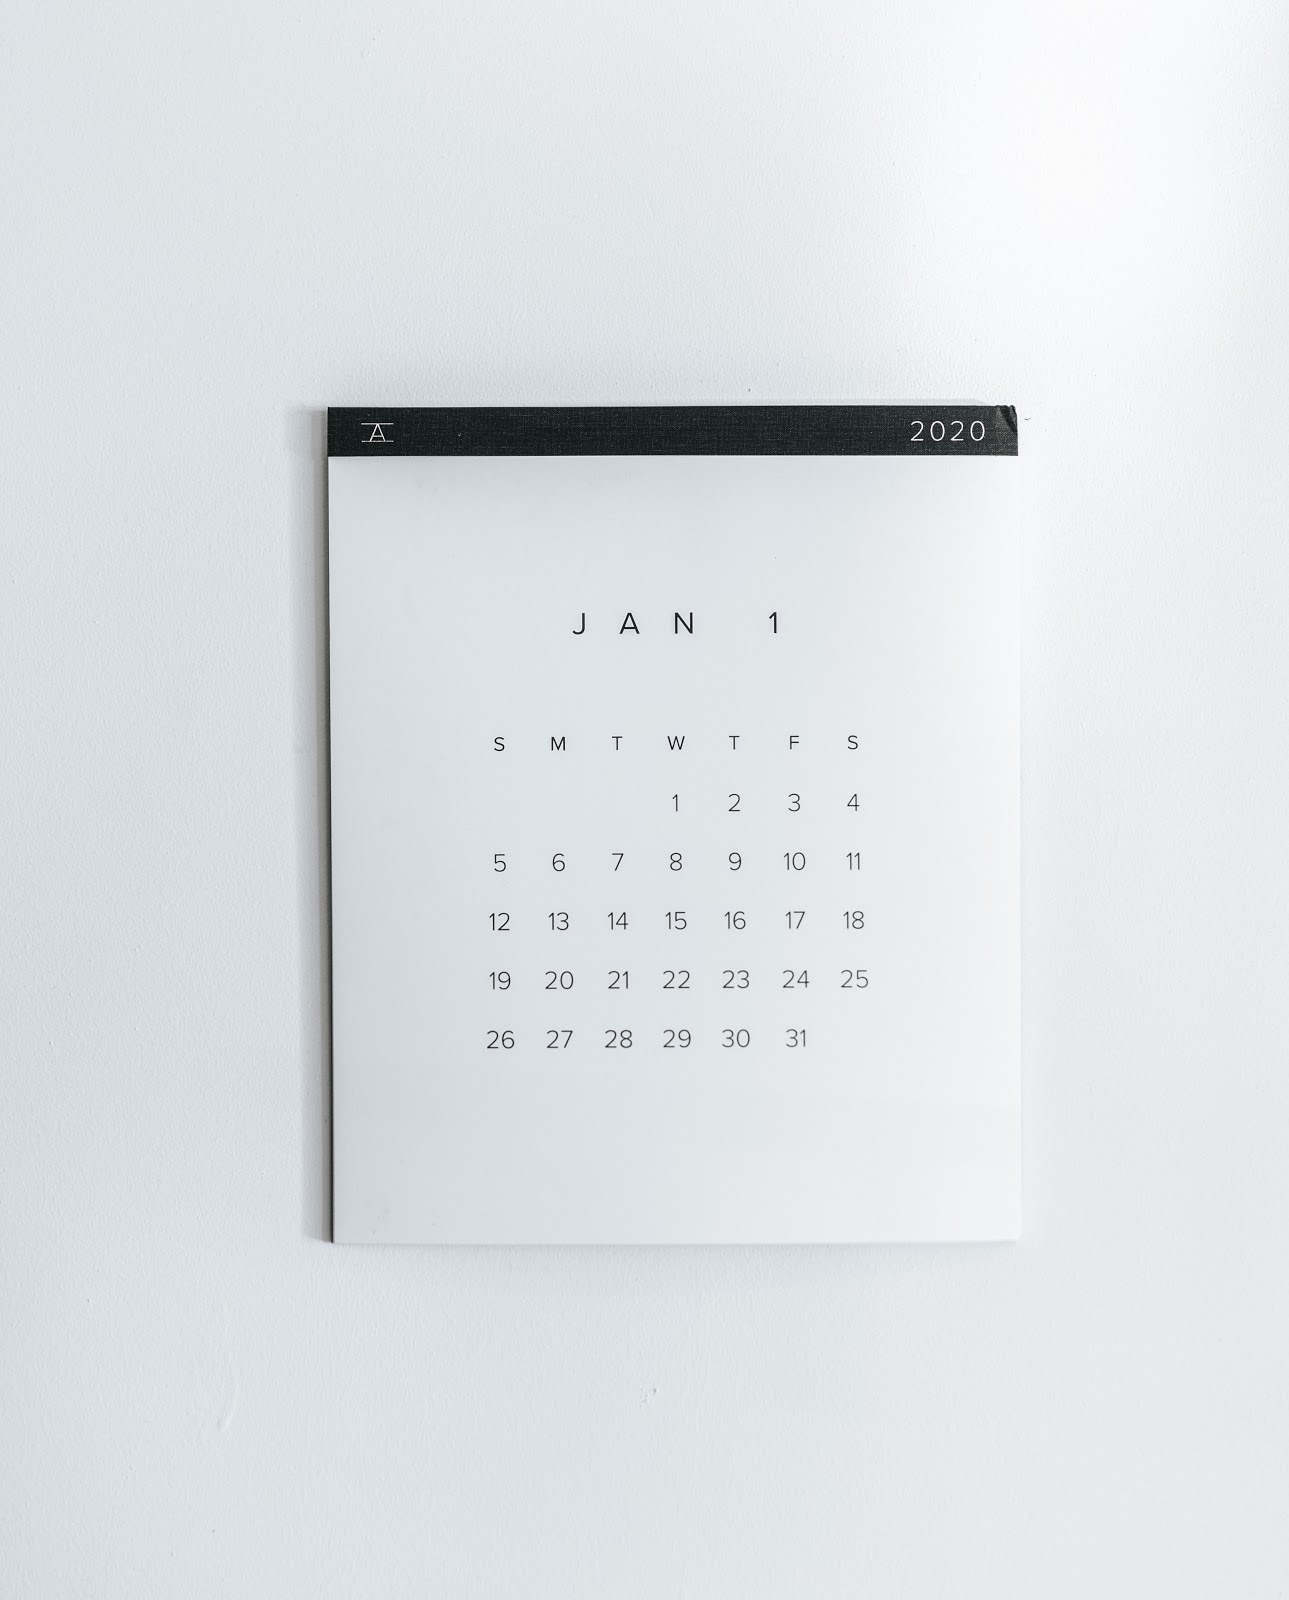 A simple wall calendar with January 2020 showing.